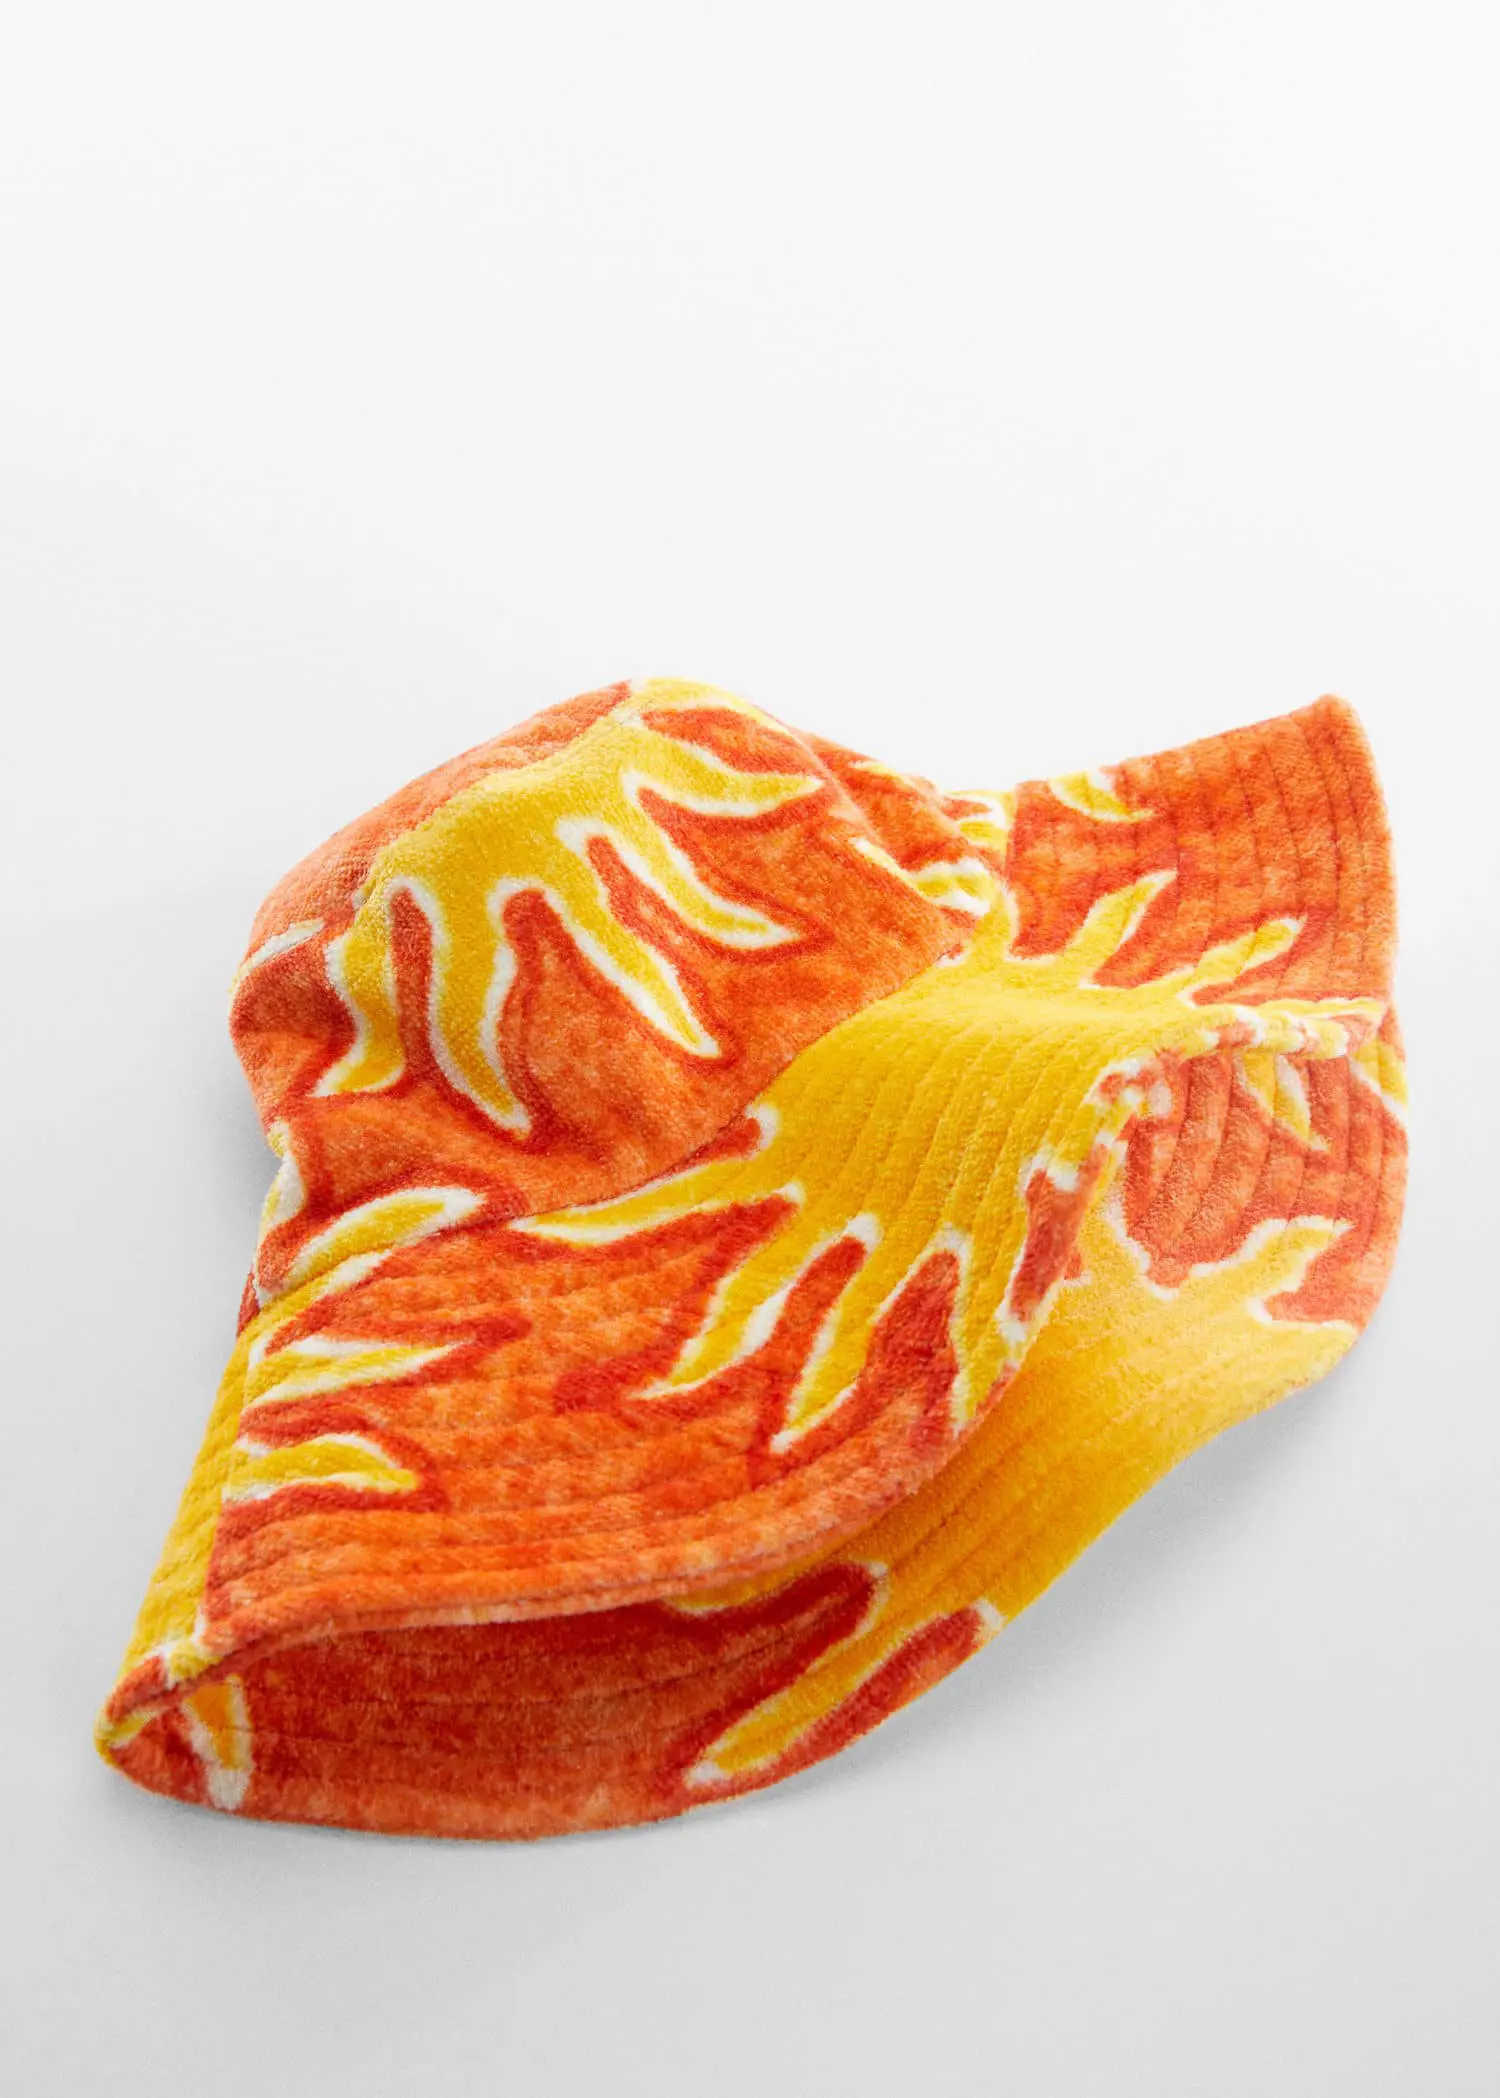 Mango Printed terry cloth bucket hat. an orange and yellow object on top of a white surface. 